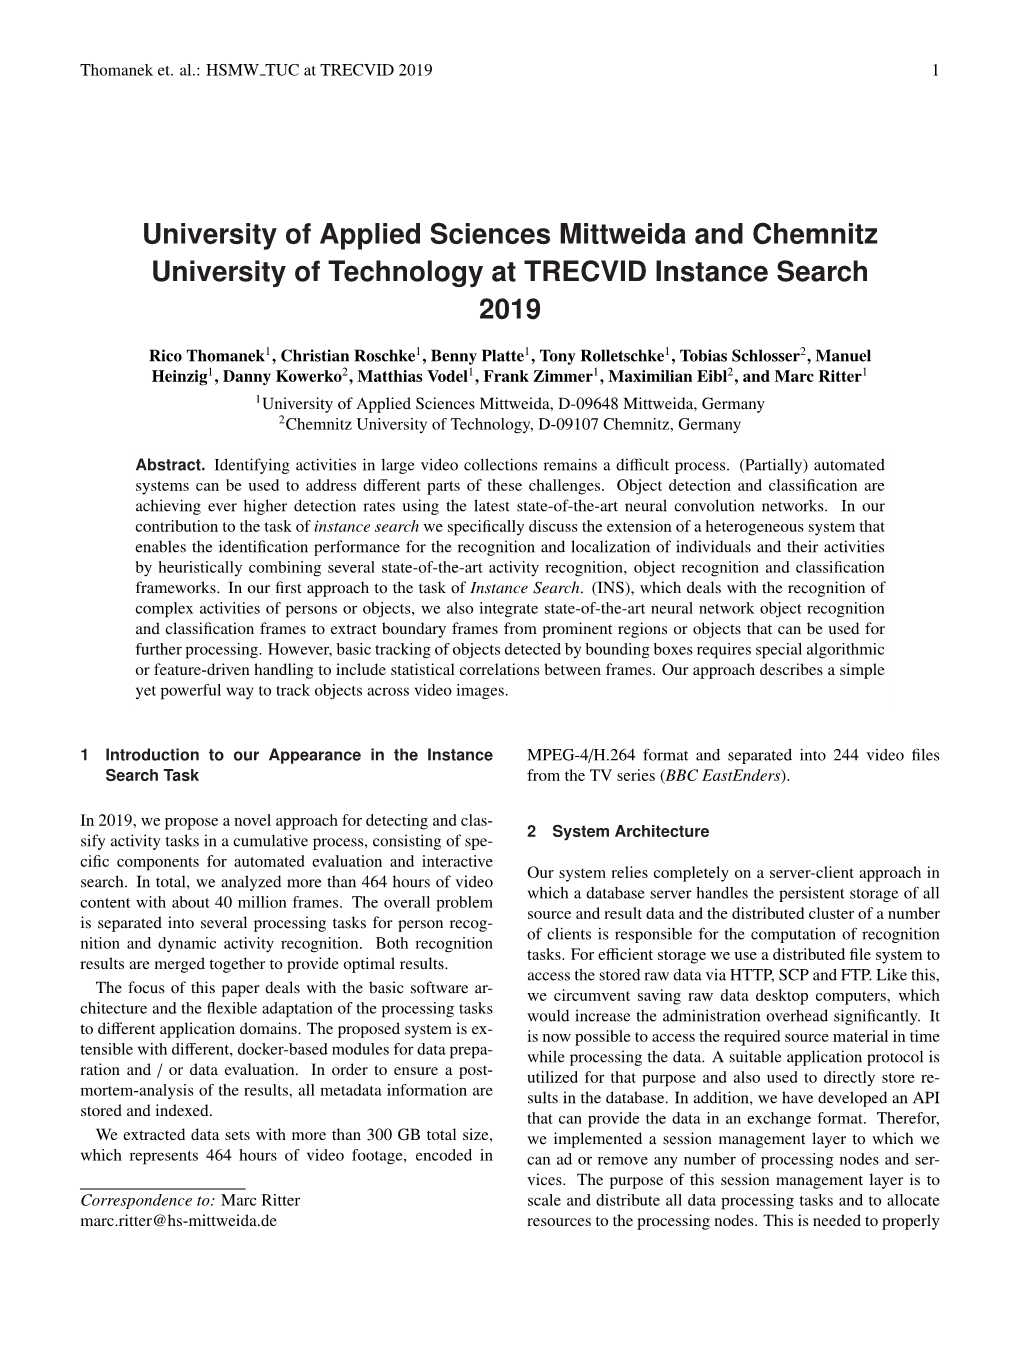 University of Applied Sciences Mittweida and Chemnitz University of Technology at TRECVID Instance Search 2019